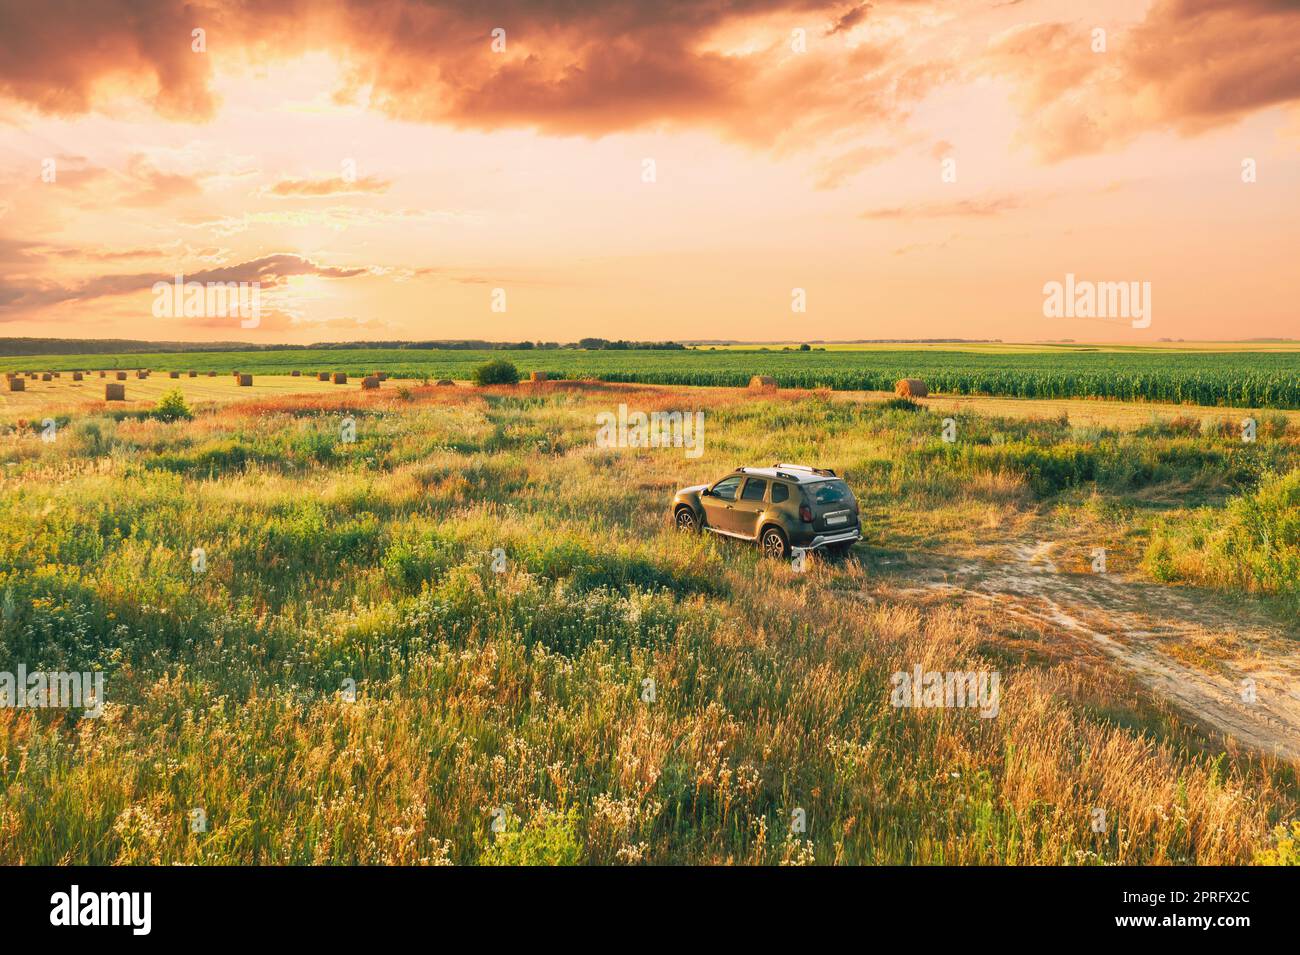 Elevated View Of Car SUV Parked Near Countryside Road In Summer Field Rural Landscape. Altered Sunset Sunrise Sky Above Meadow Rural Landscape Stock Photo